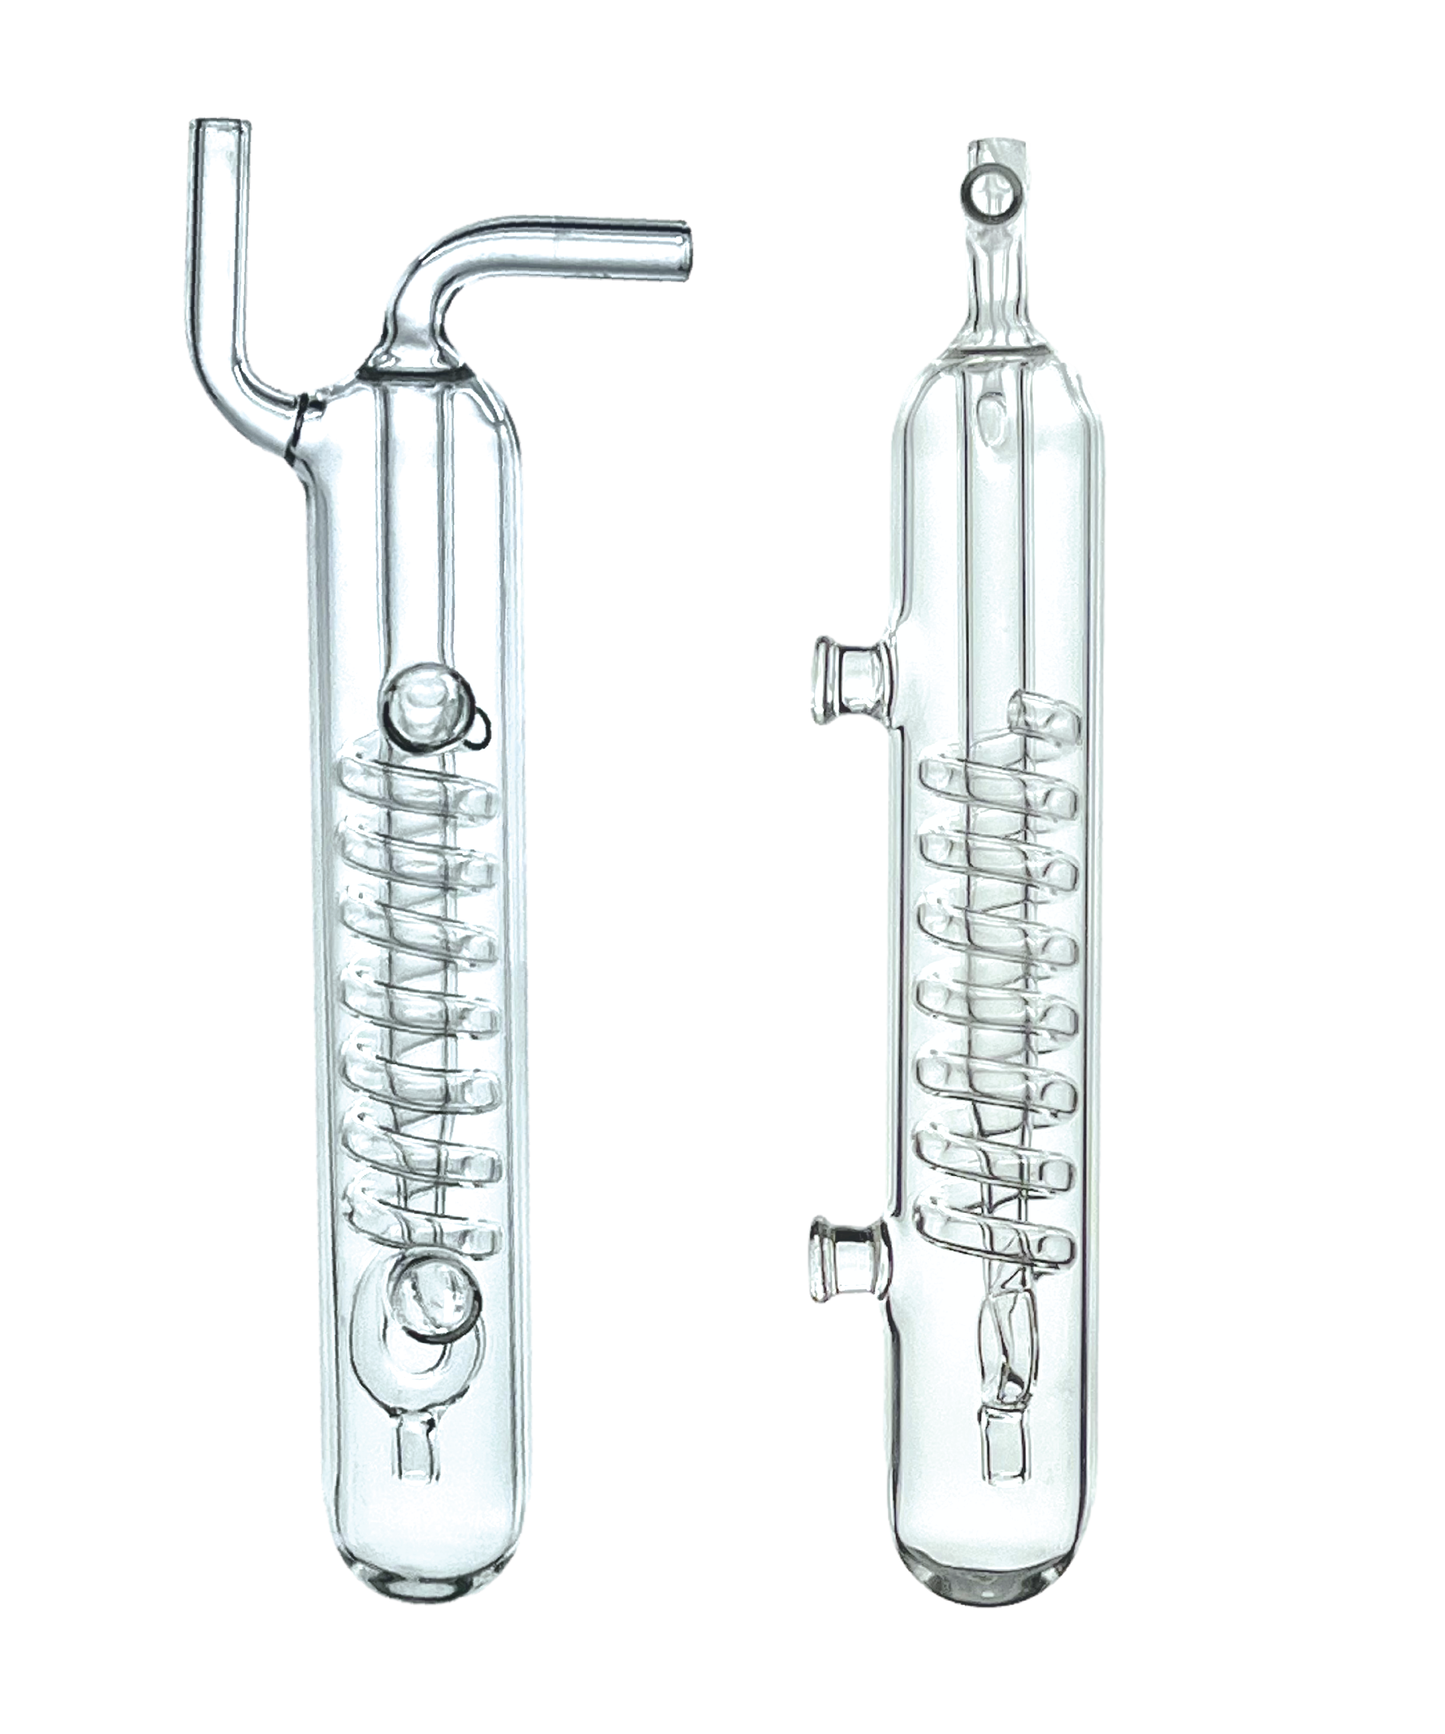 Spiral Glass CO2 Bubble Counter